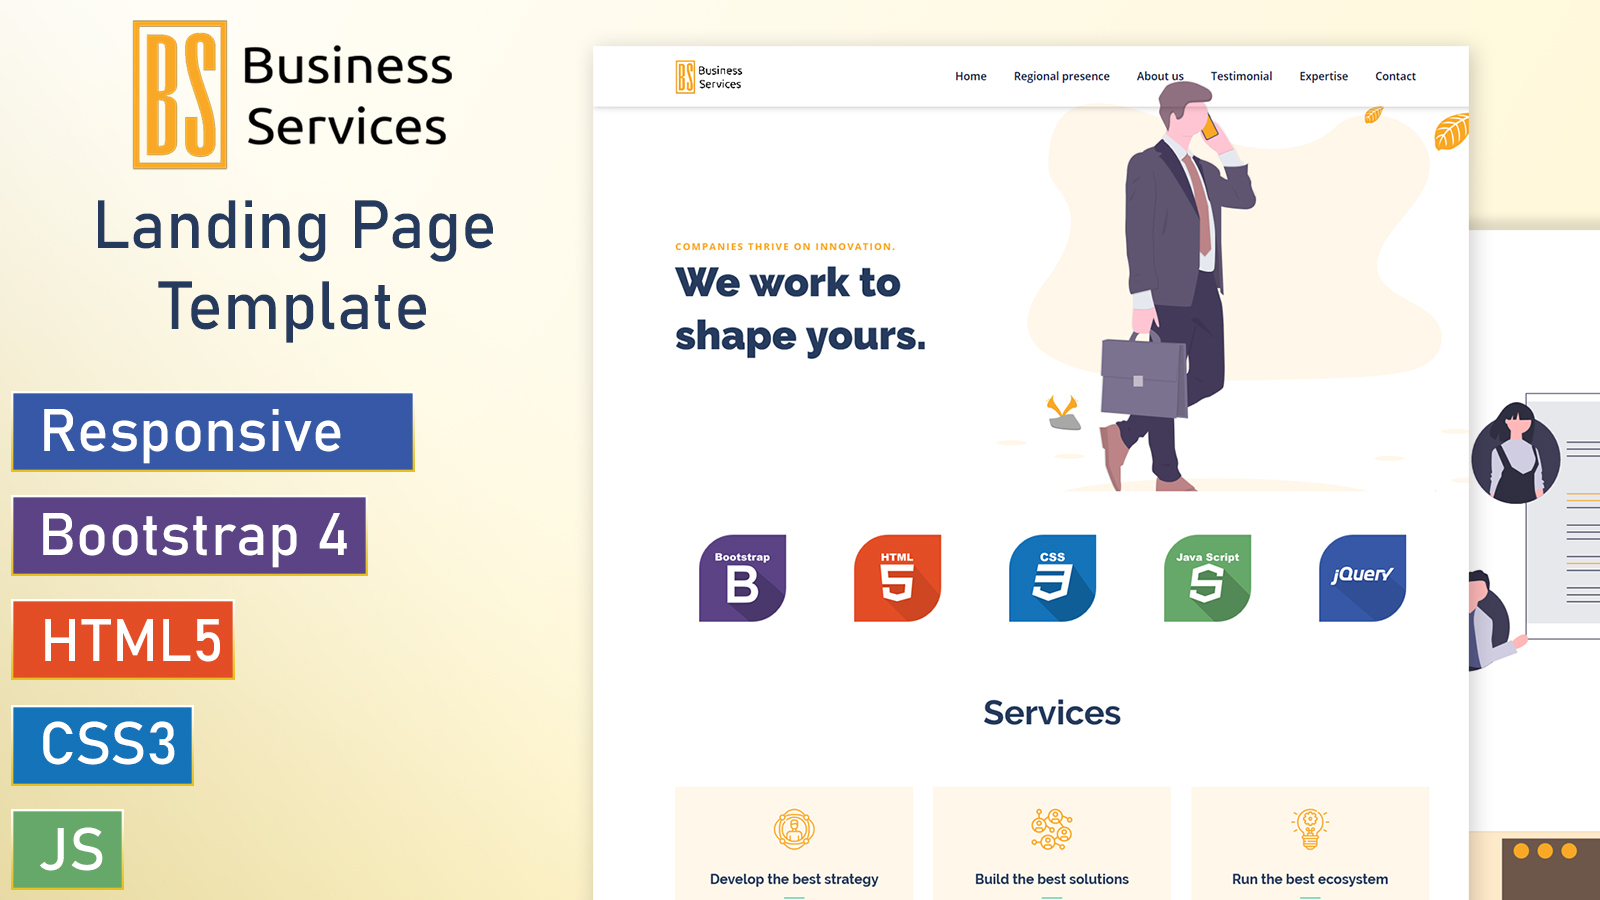 BusinessService - Bootstrap 4 Landing Page Template